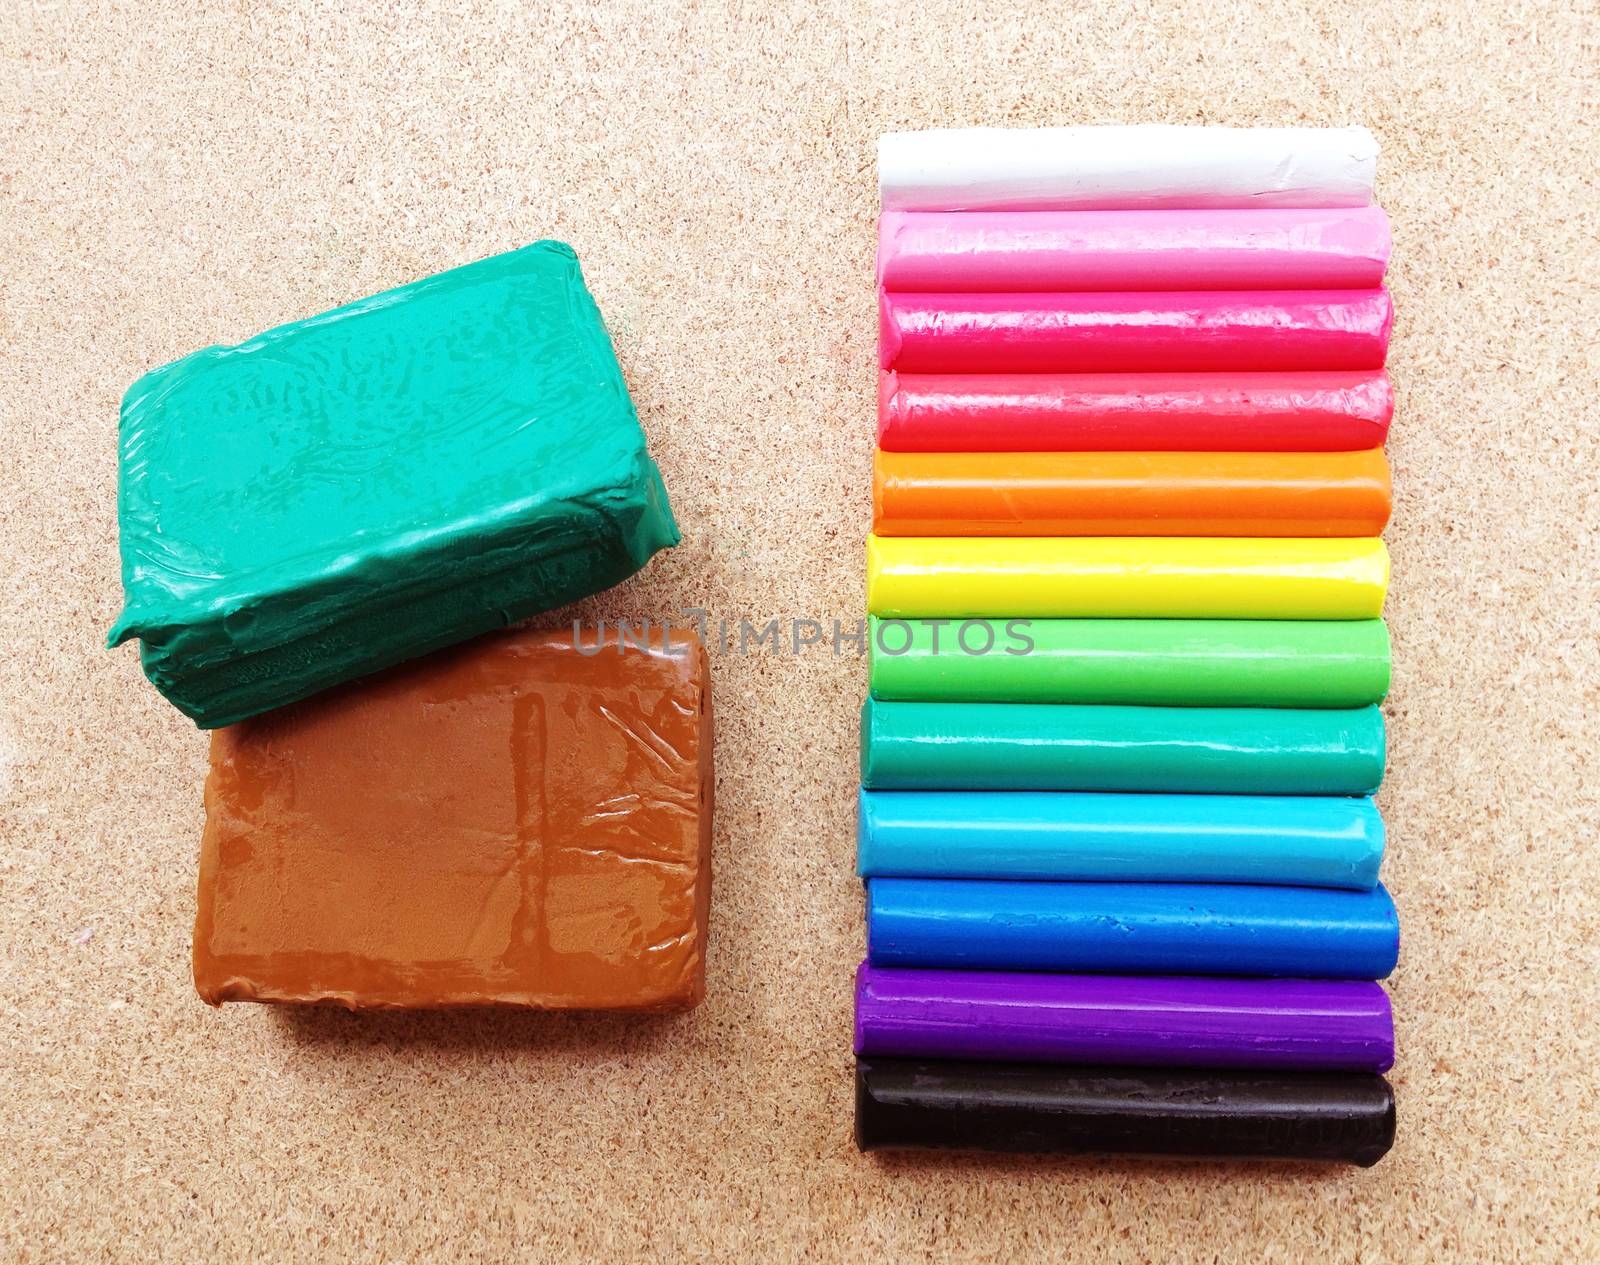 Clay palettes on plywood background. Rainbow colors
 by Bowonpat